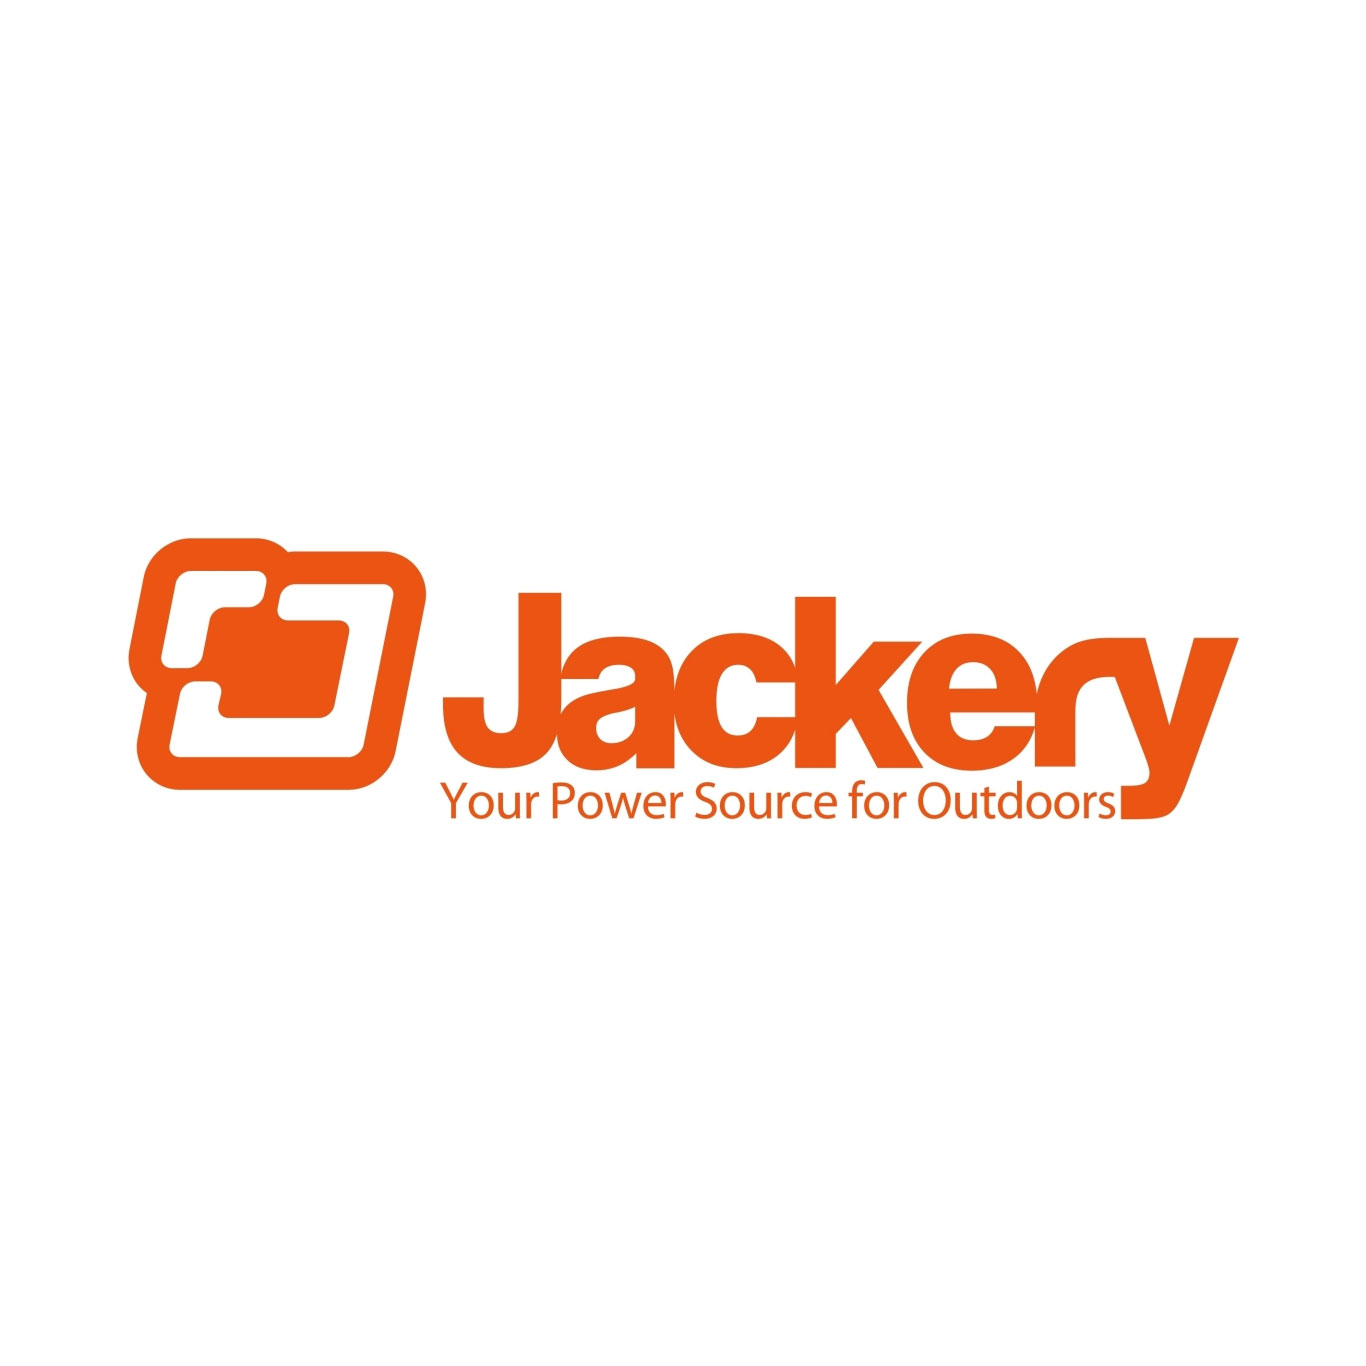 Jackery review - portable outdoor solar panels